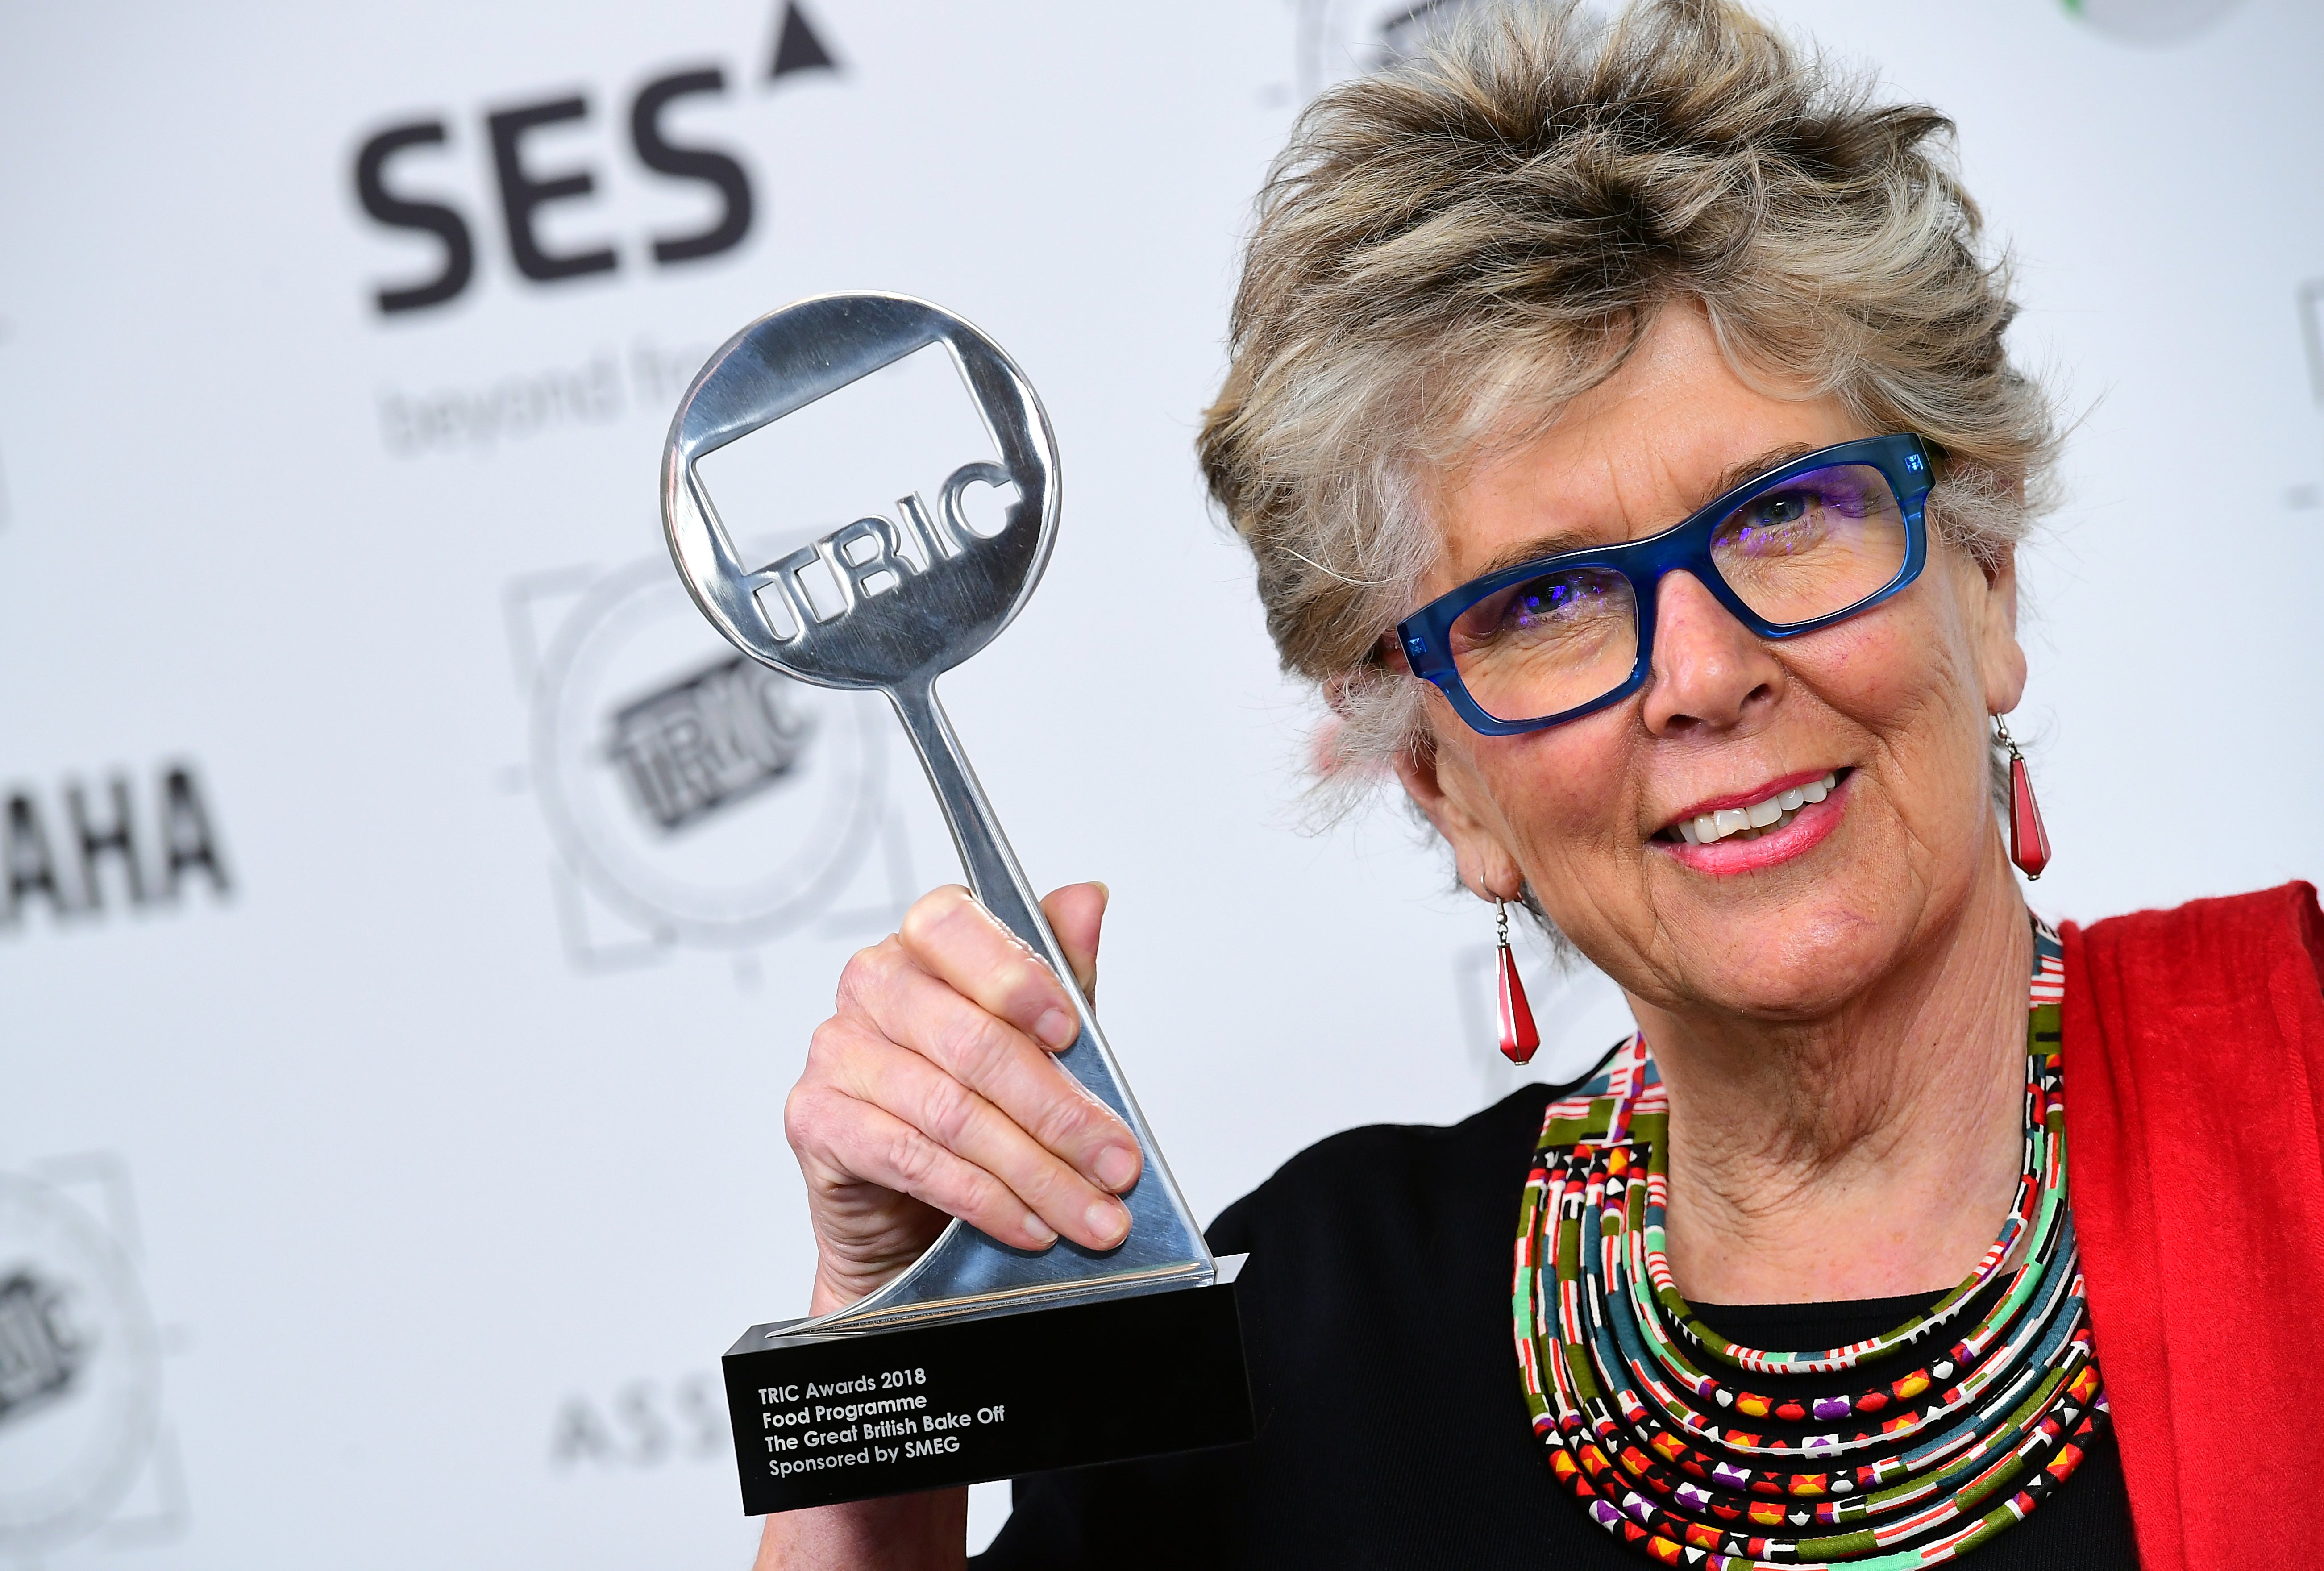 Prue Leith with the award for Best Food Programme Sponsored by SMEG for ‘The Great British Bake Off’ during the 2018 TRIC Awards